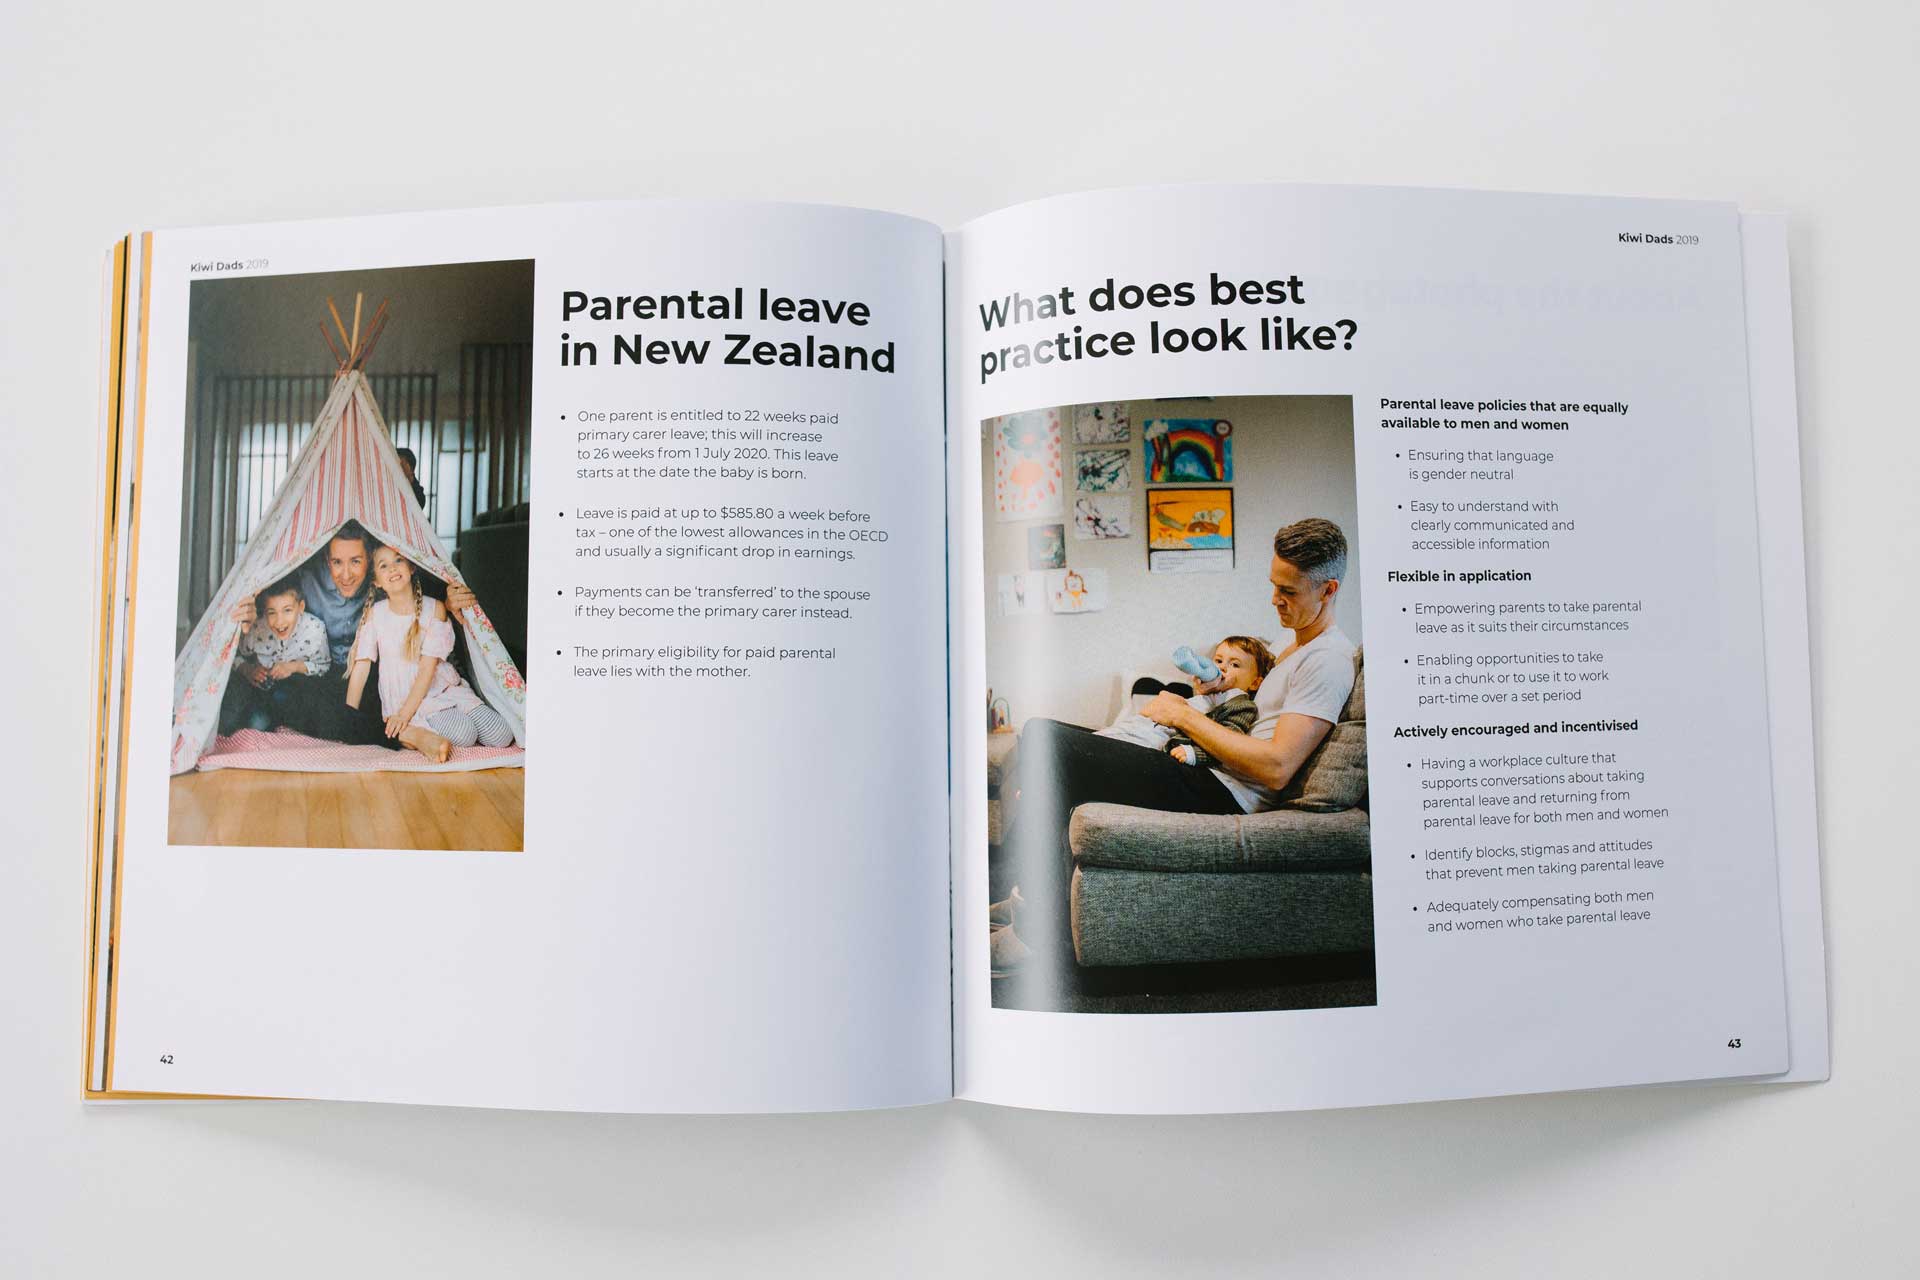 kiwi dads booklet wording about parents leave in new zealand photos by sarah weber photography